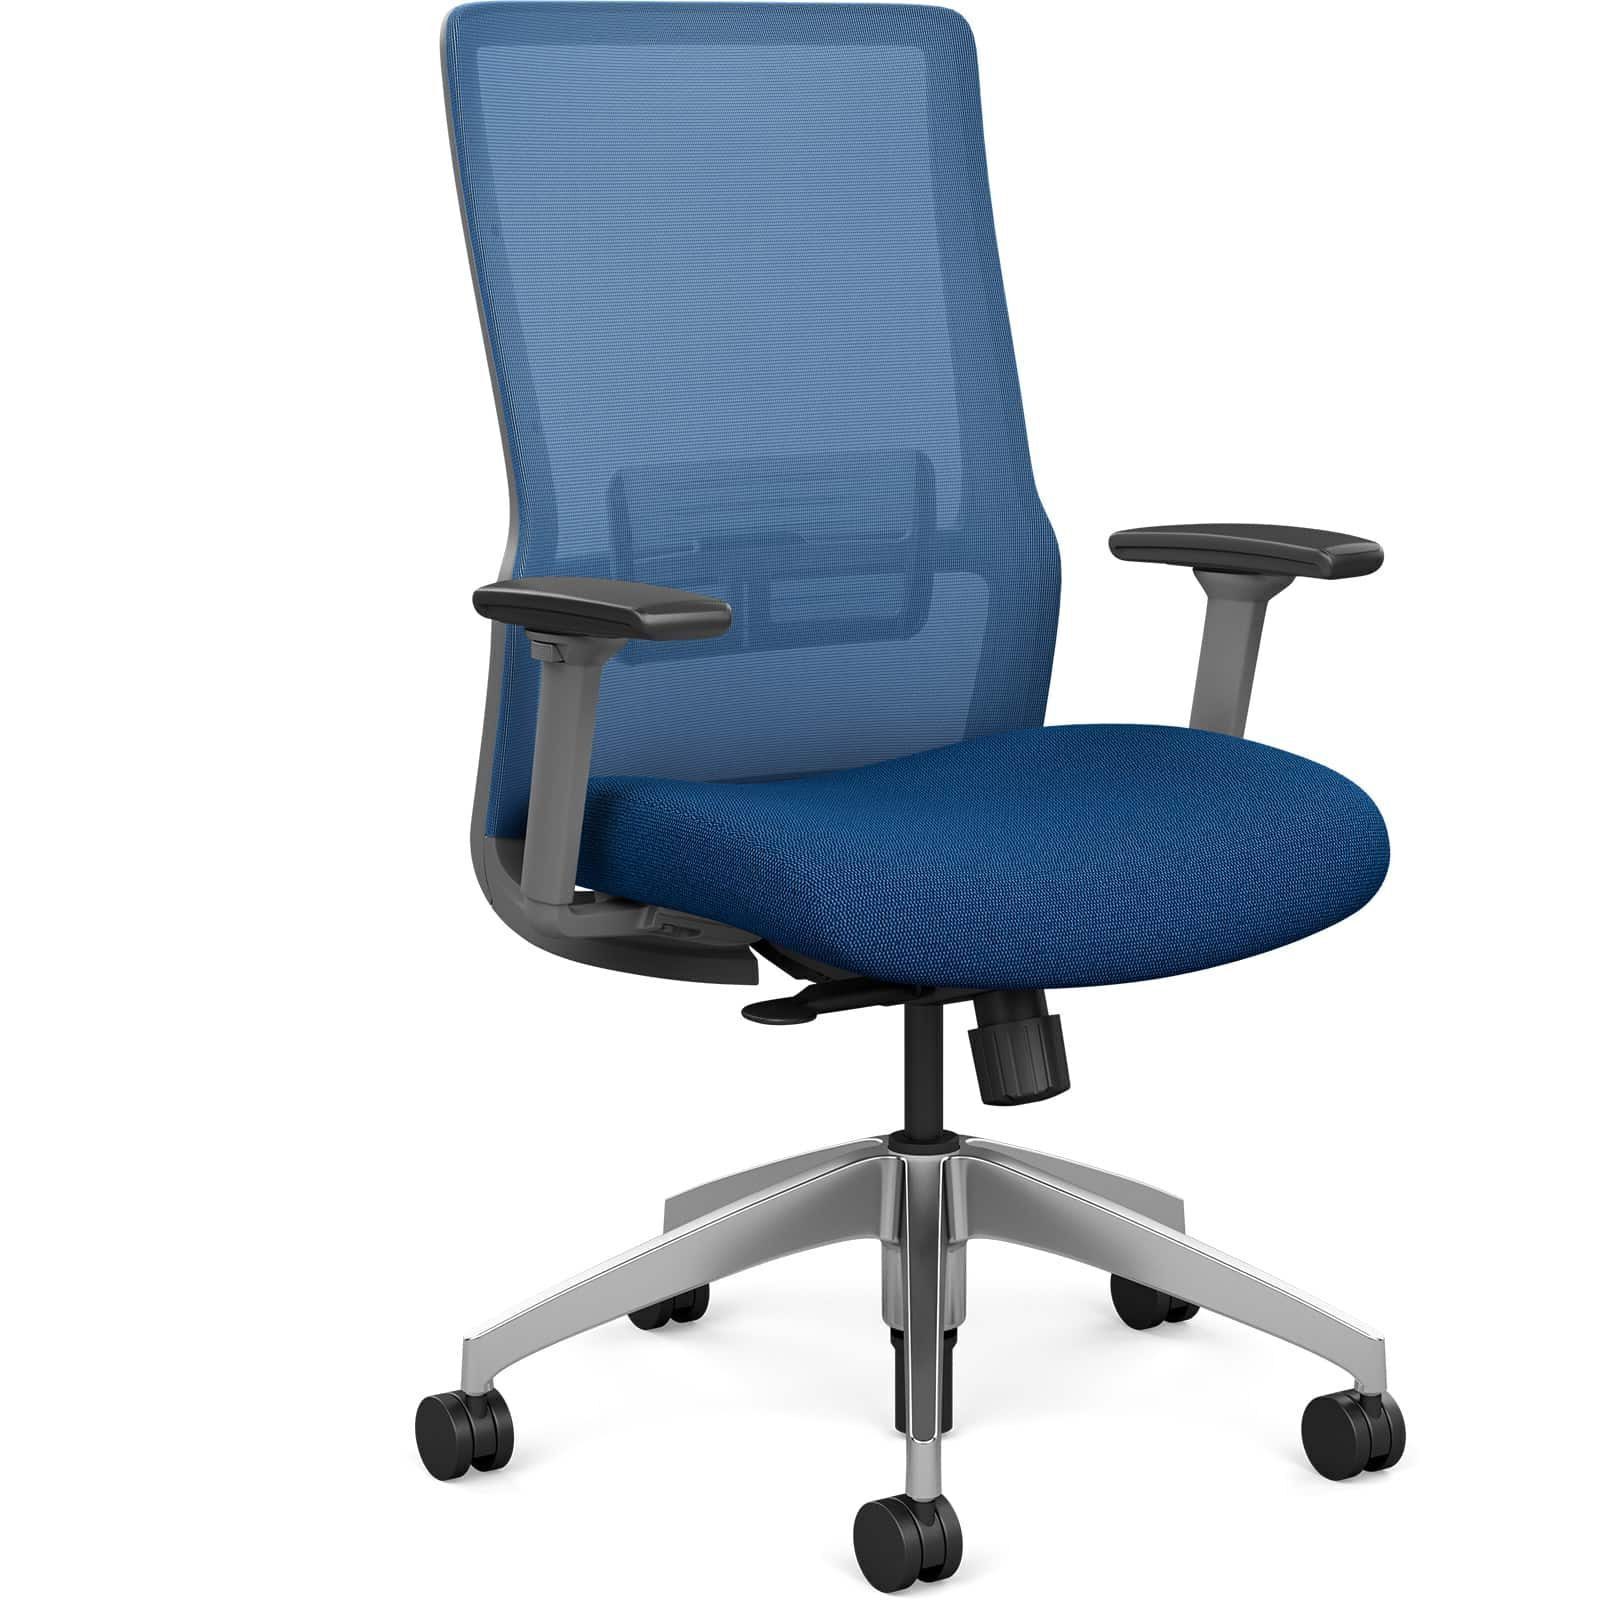 Chair: SitOnIt Chairs Seating Angeles Office Novo Los